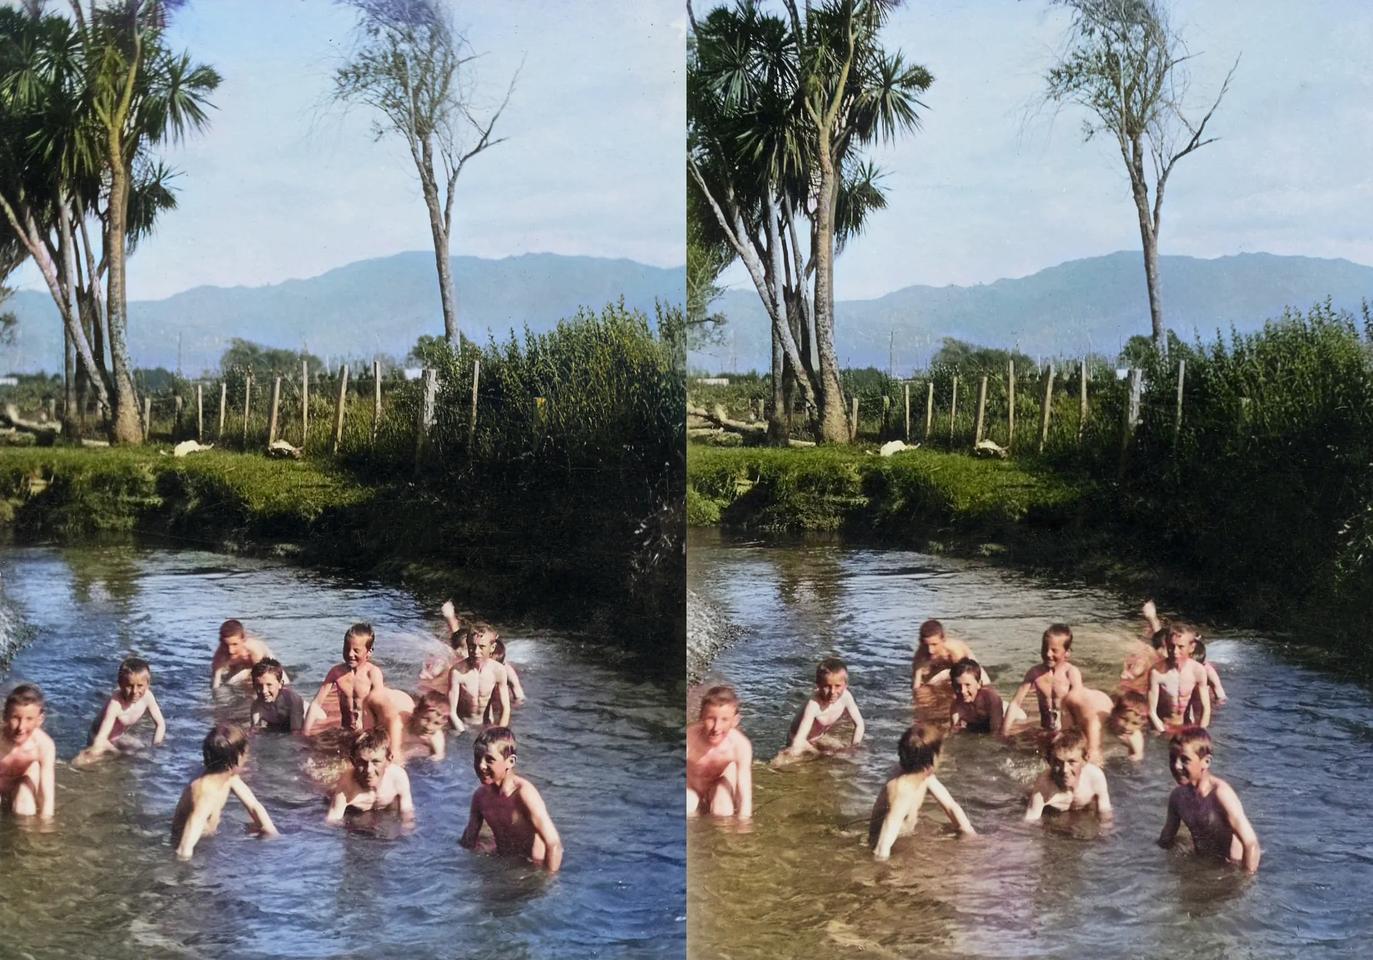 'About 11 boys swimming nude in stream, Shannon, 1901'